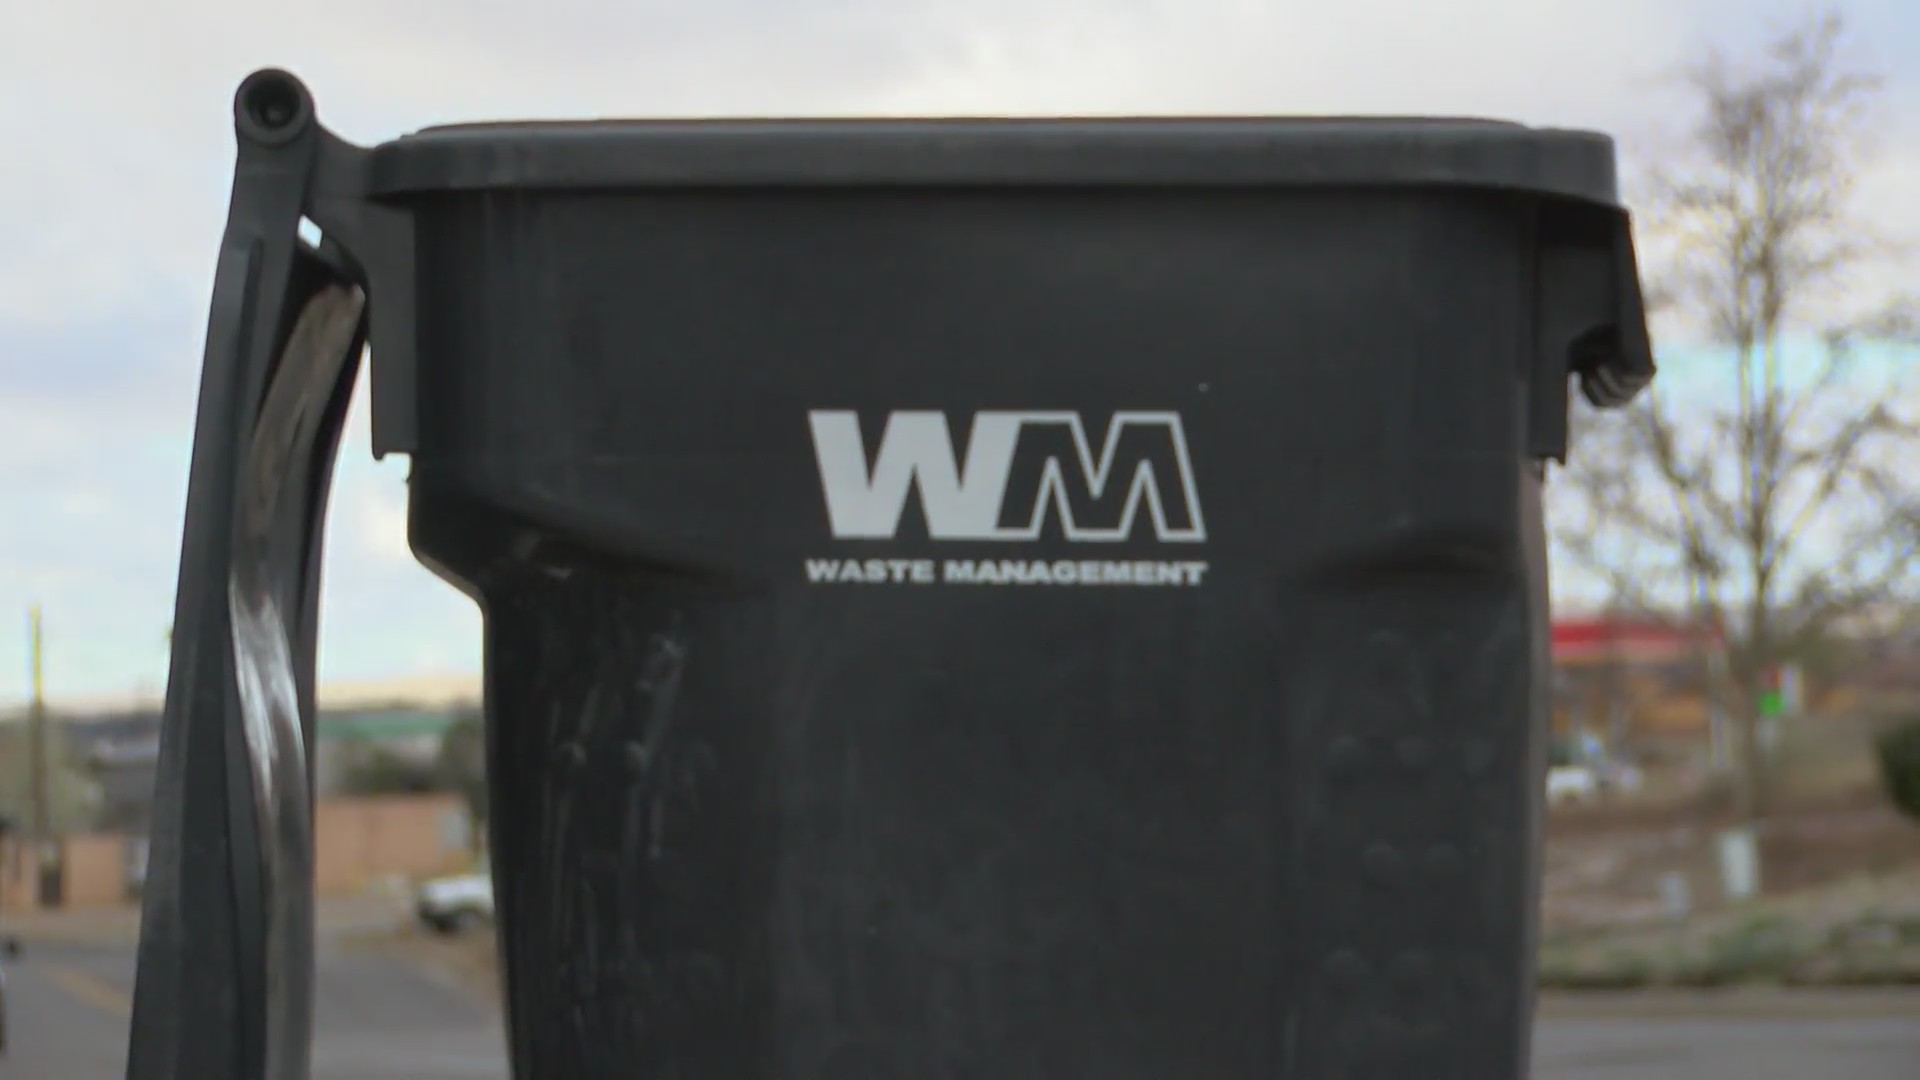 Thumbnail for the video titled "Albuquerque Solid Waste Management Dept. offering spring green waste pickup"